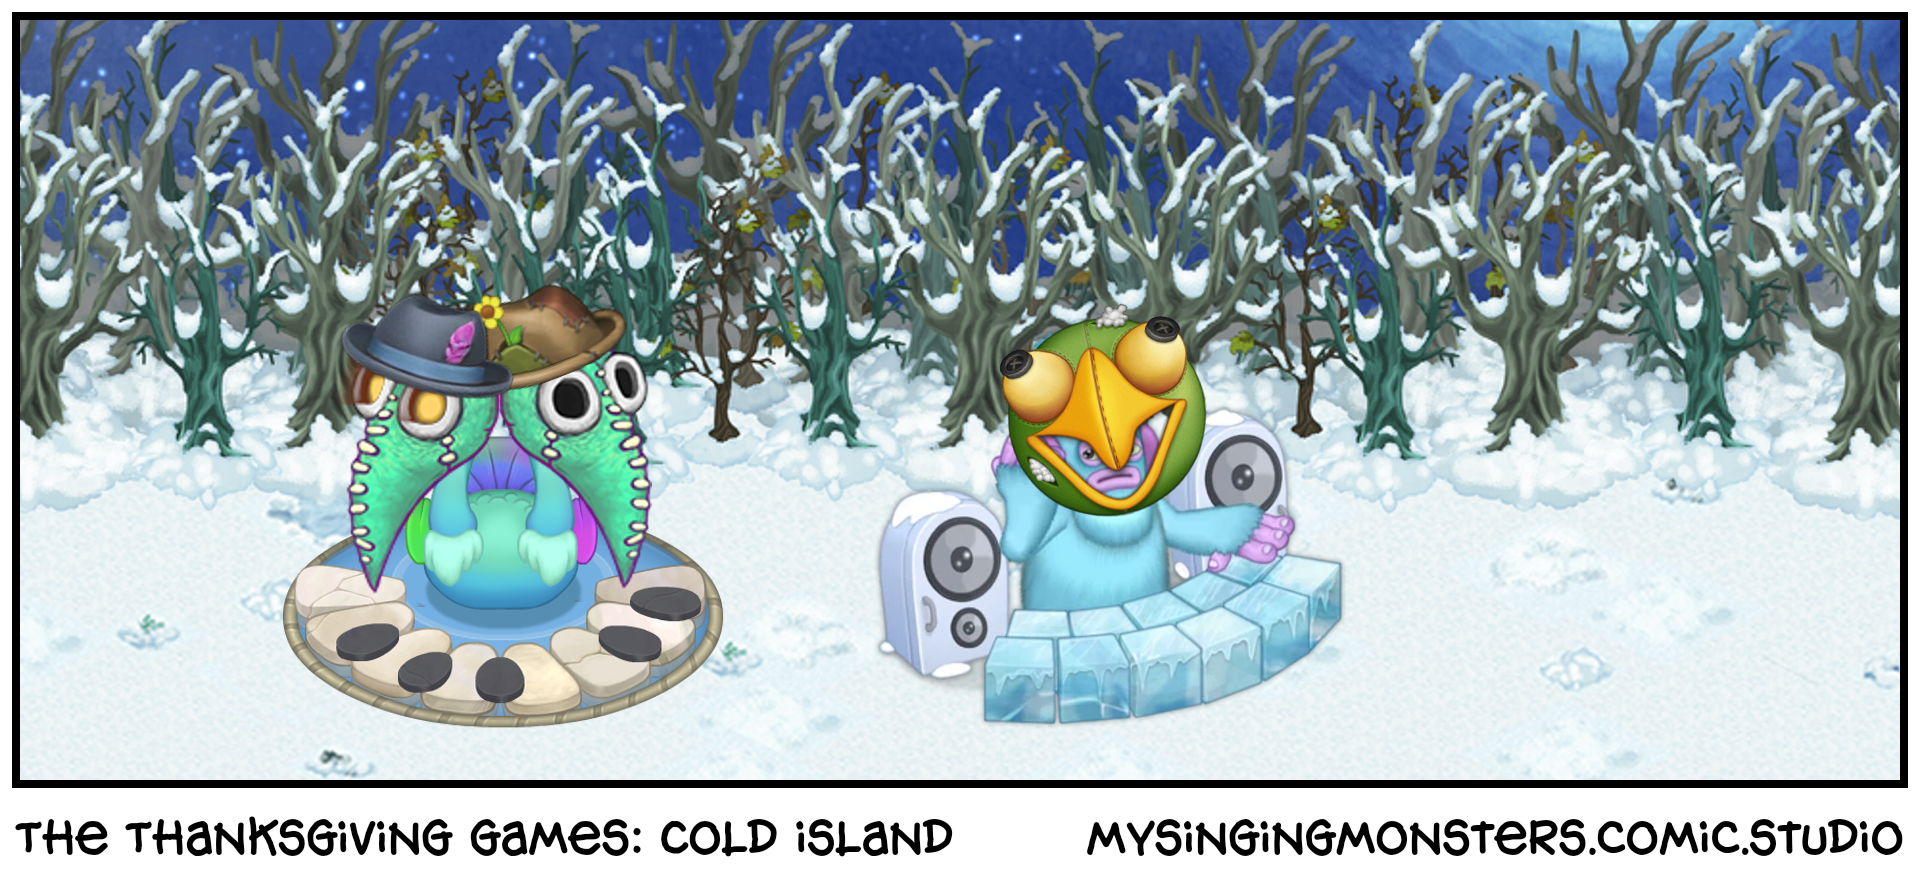 The Thanksgiving games: Cold island